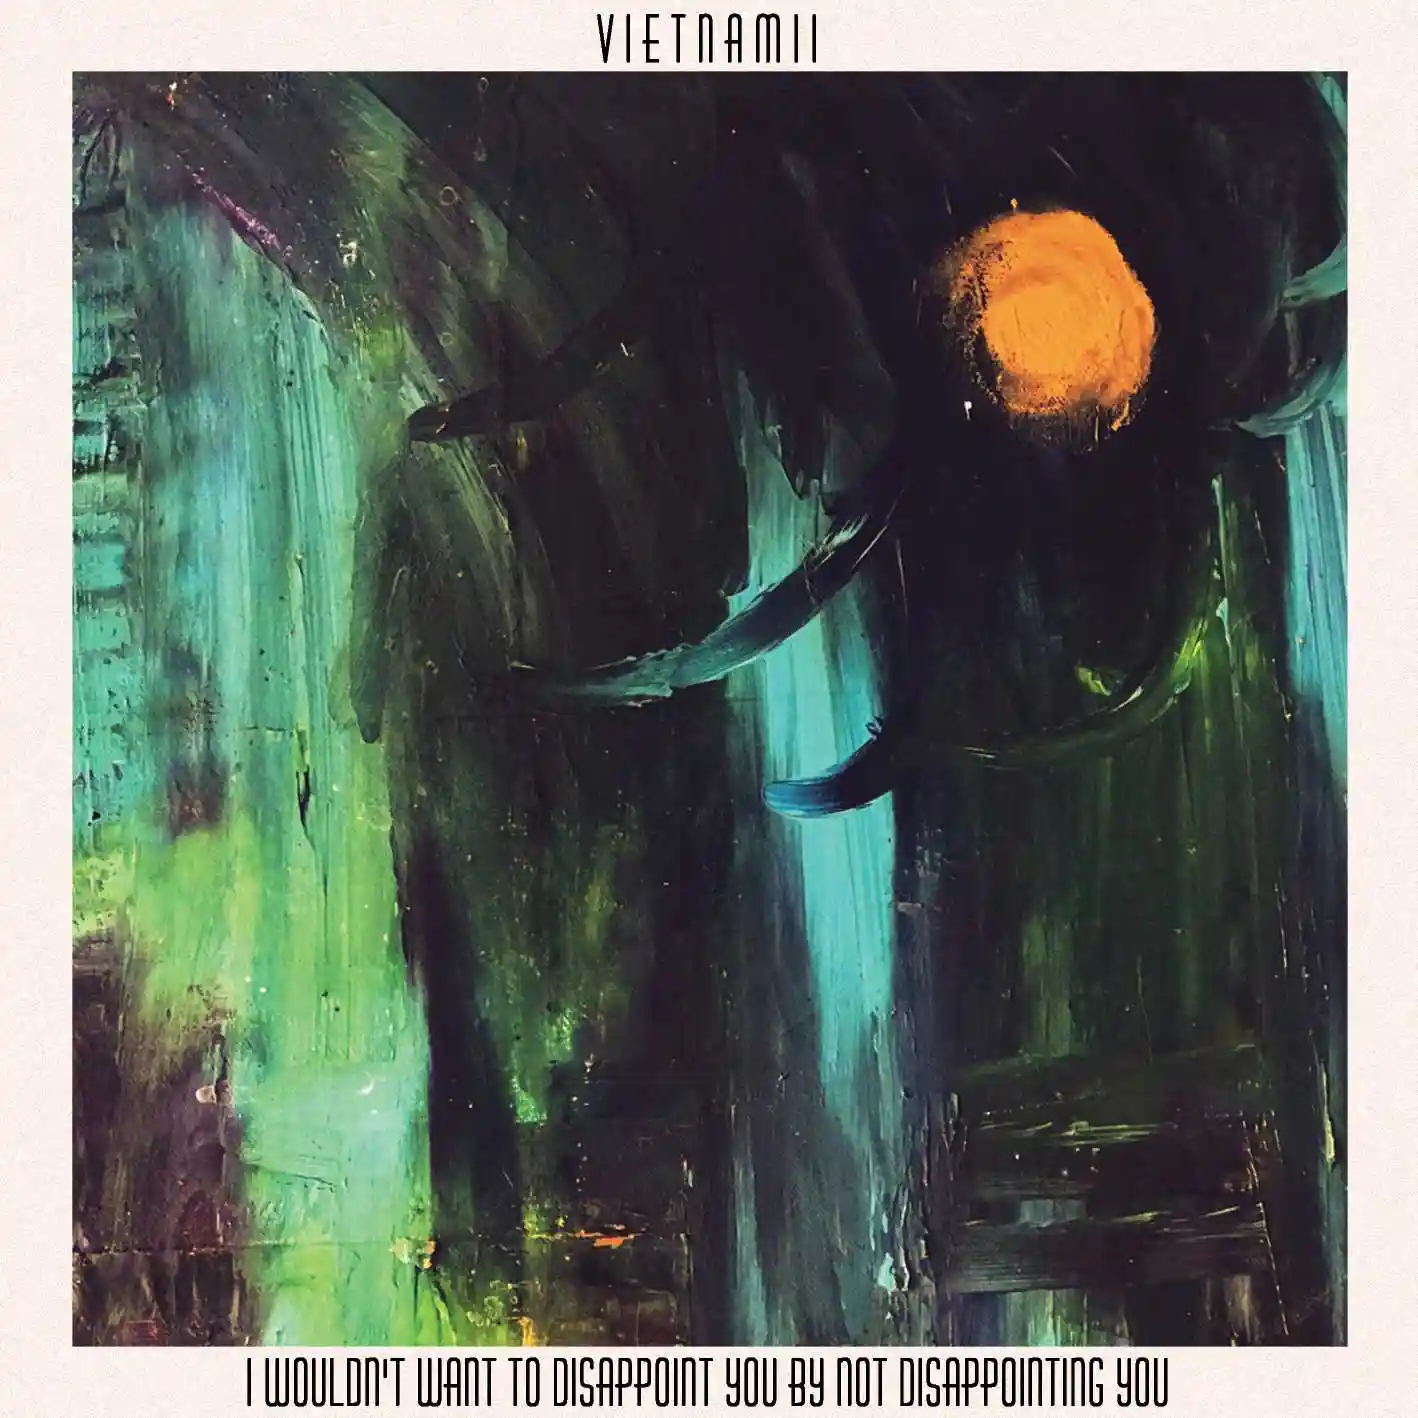 Cover of “I Wouldn’t Want To Disappoint You By Not Disappointing You” by Vietnam II